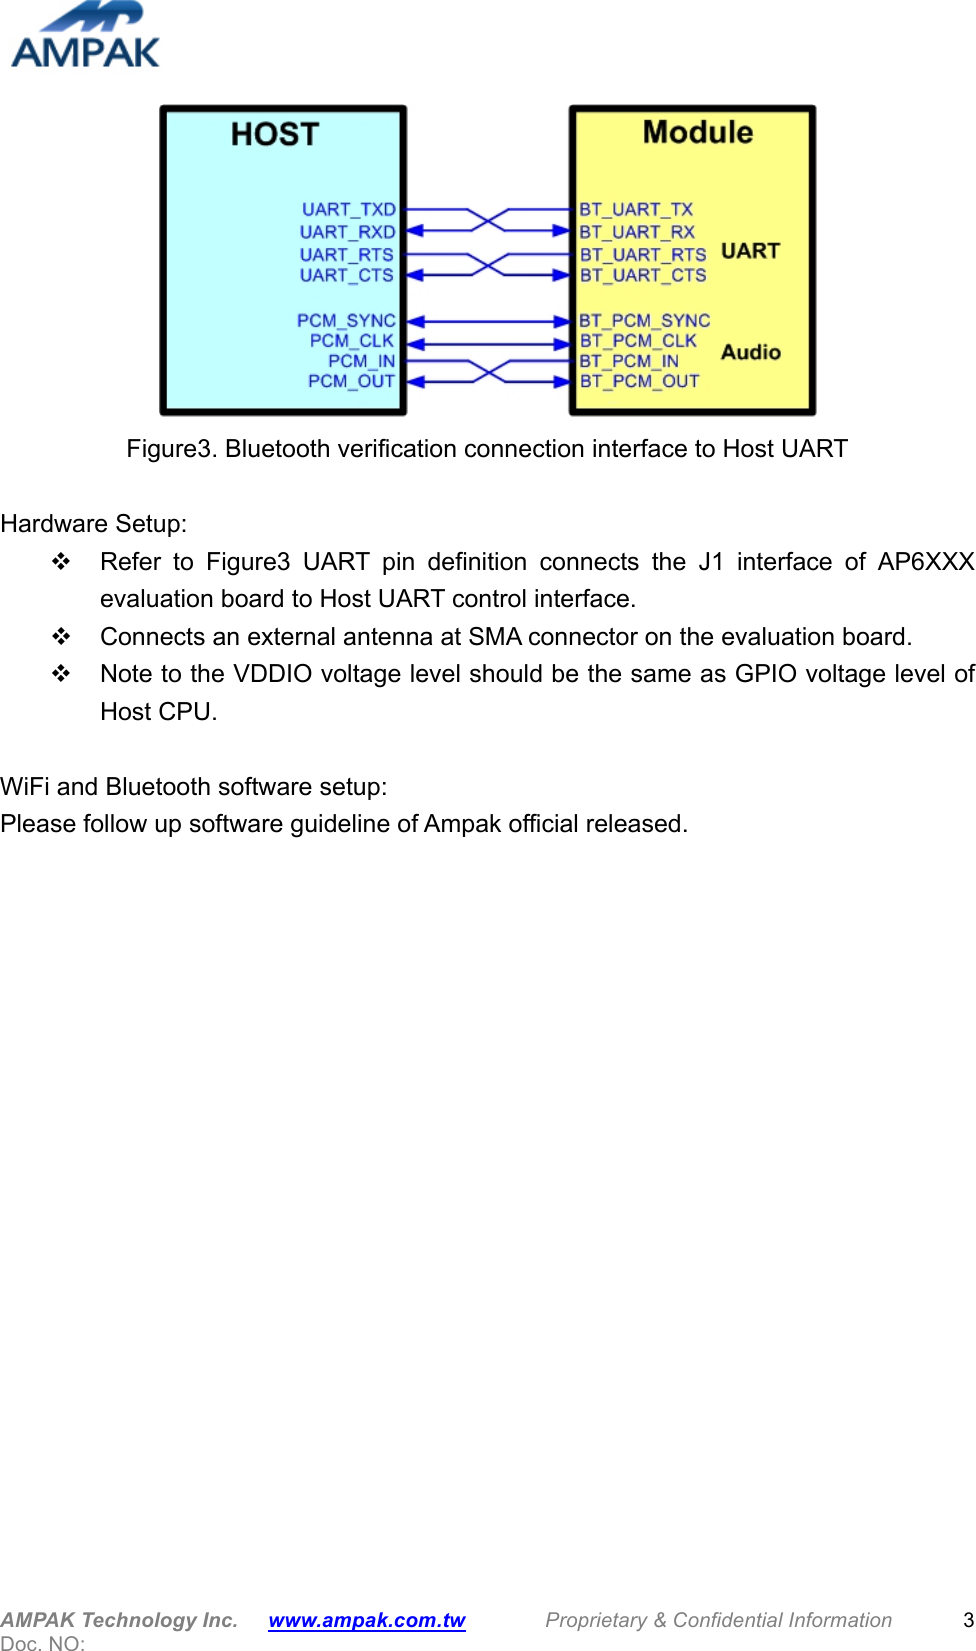  AMPAK Technology Inc.   www.ampak.com.tw        Proprietary &amp; Confidential Information   Doc. NO:   3  Figure3. Bluetooth verification connection interface to Host UART  Hardware Setup: v  Refer  to  Figure3  UART  pin  definition  connects  the  J1  interface  of  AP6XXX evaluation board to Host UART control interface. v  Connects an external antenna at SMA connector on the evaluation board. v  Note to the VDDIO voltage level should be the same as GPIO voltage level of Host CPU.  WiFi and Bluetooth software setup: Please follow up software guideline of Ampak official released.   